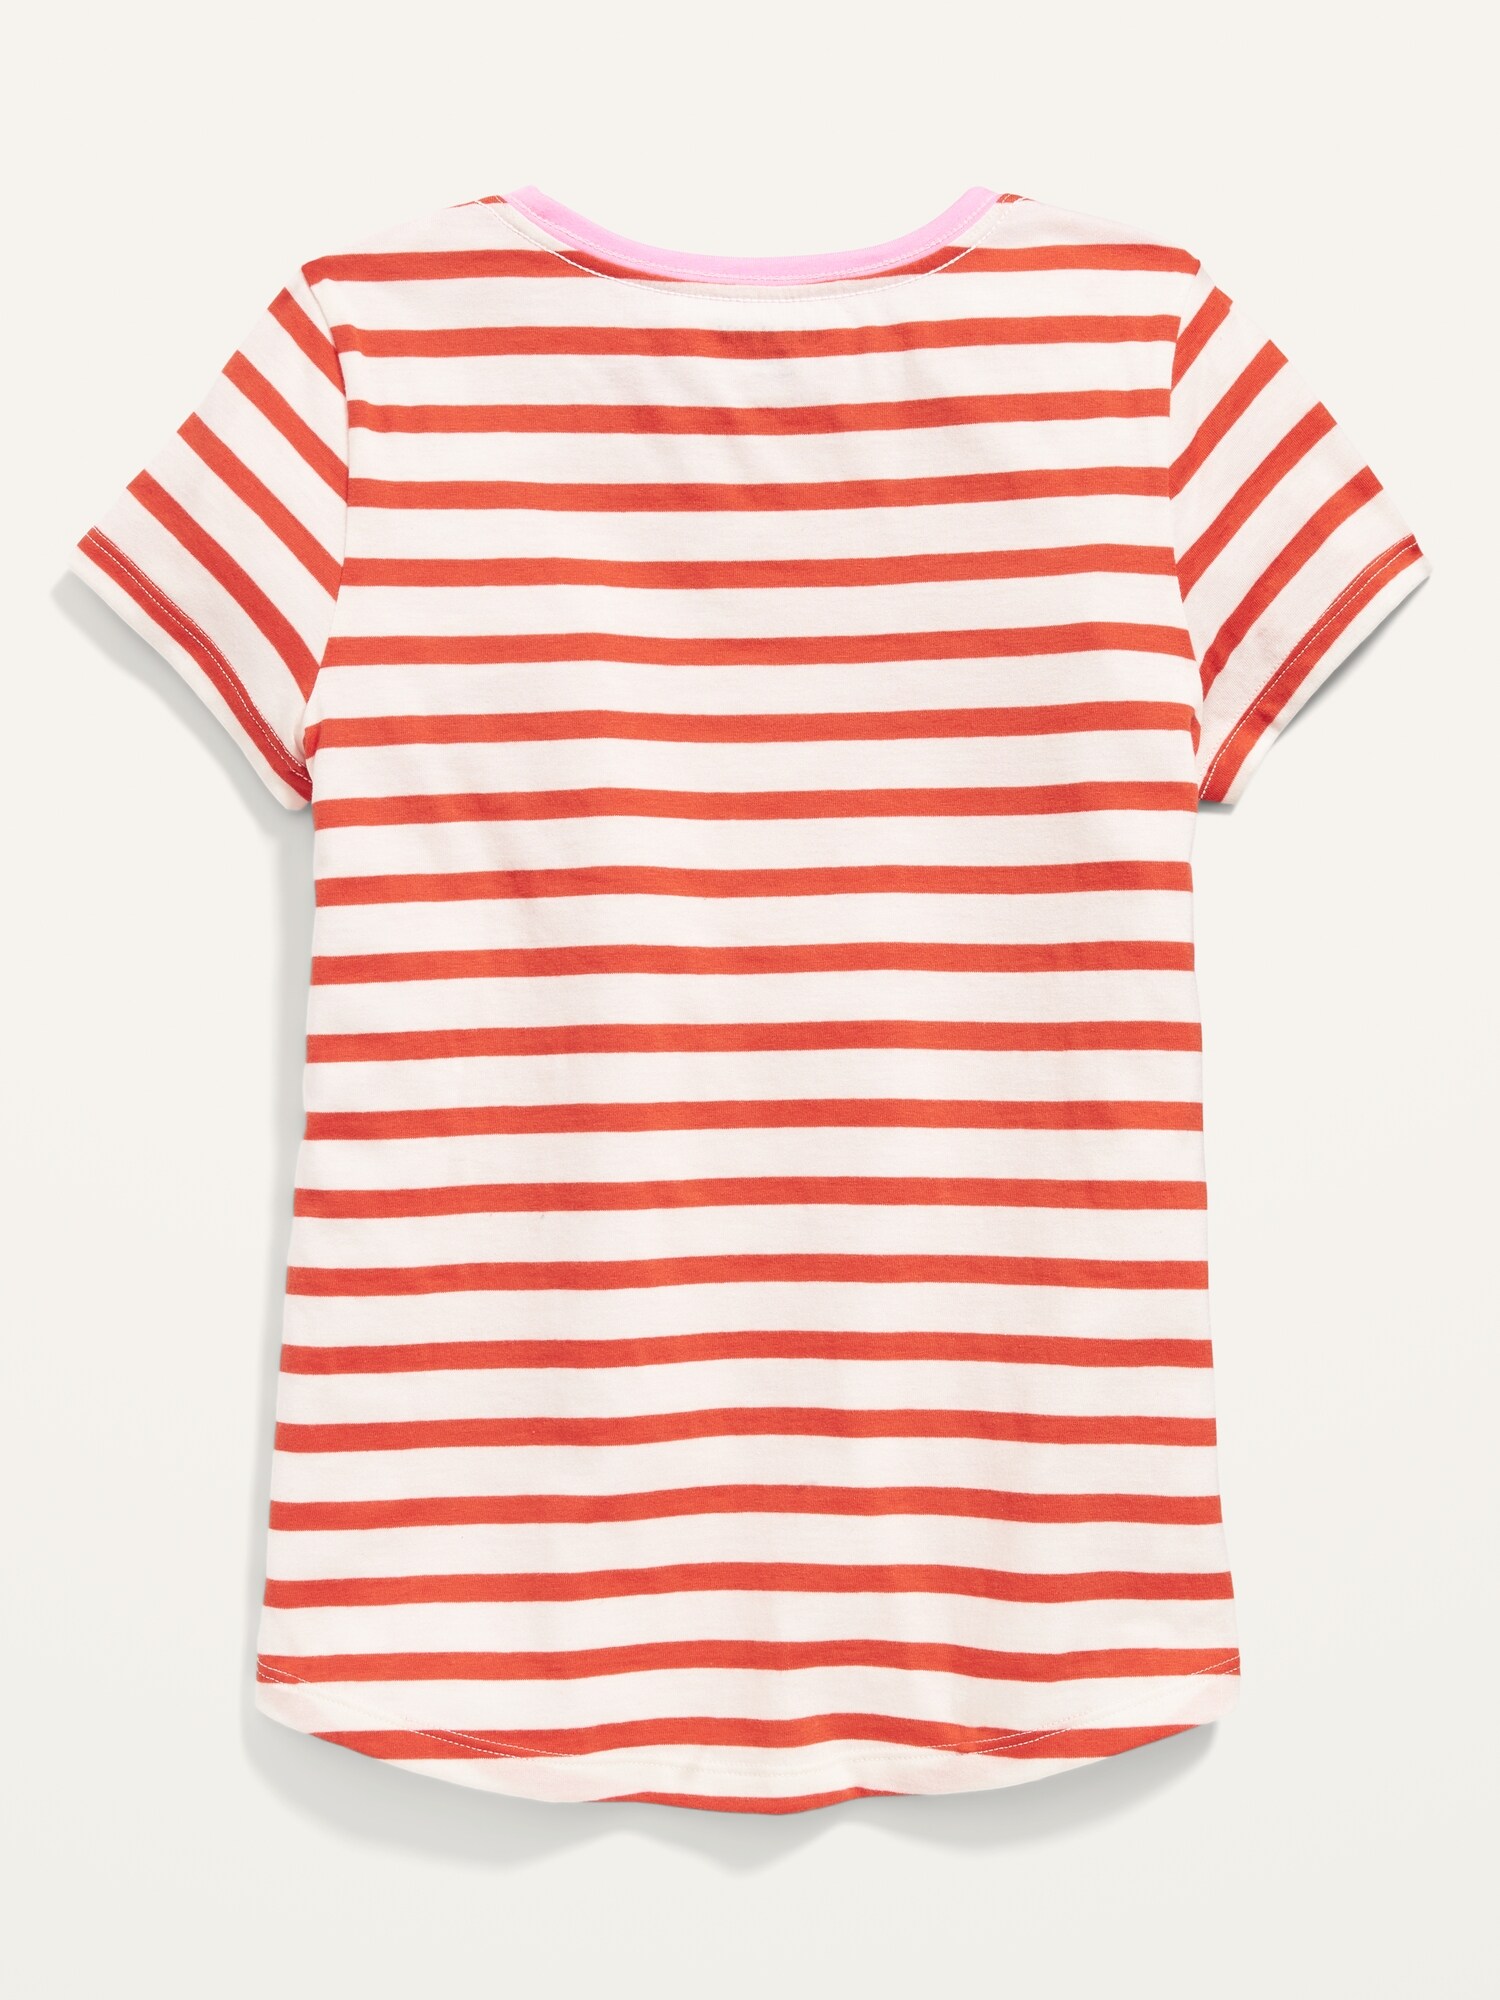 Softest Short-Sleeve Printed T-Shirt for Girls | Old Navy